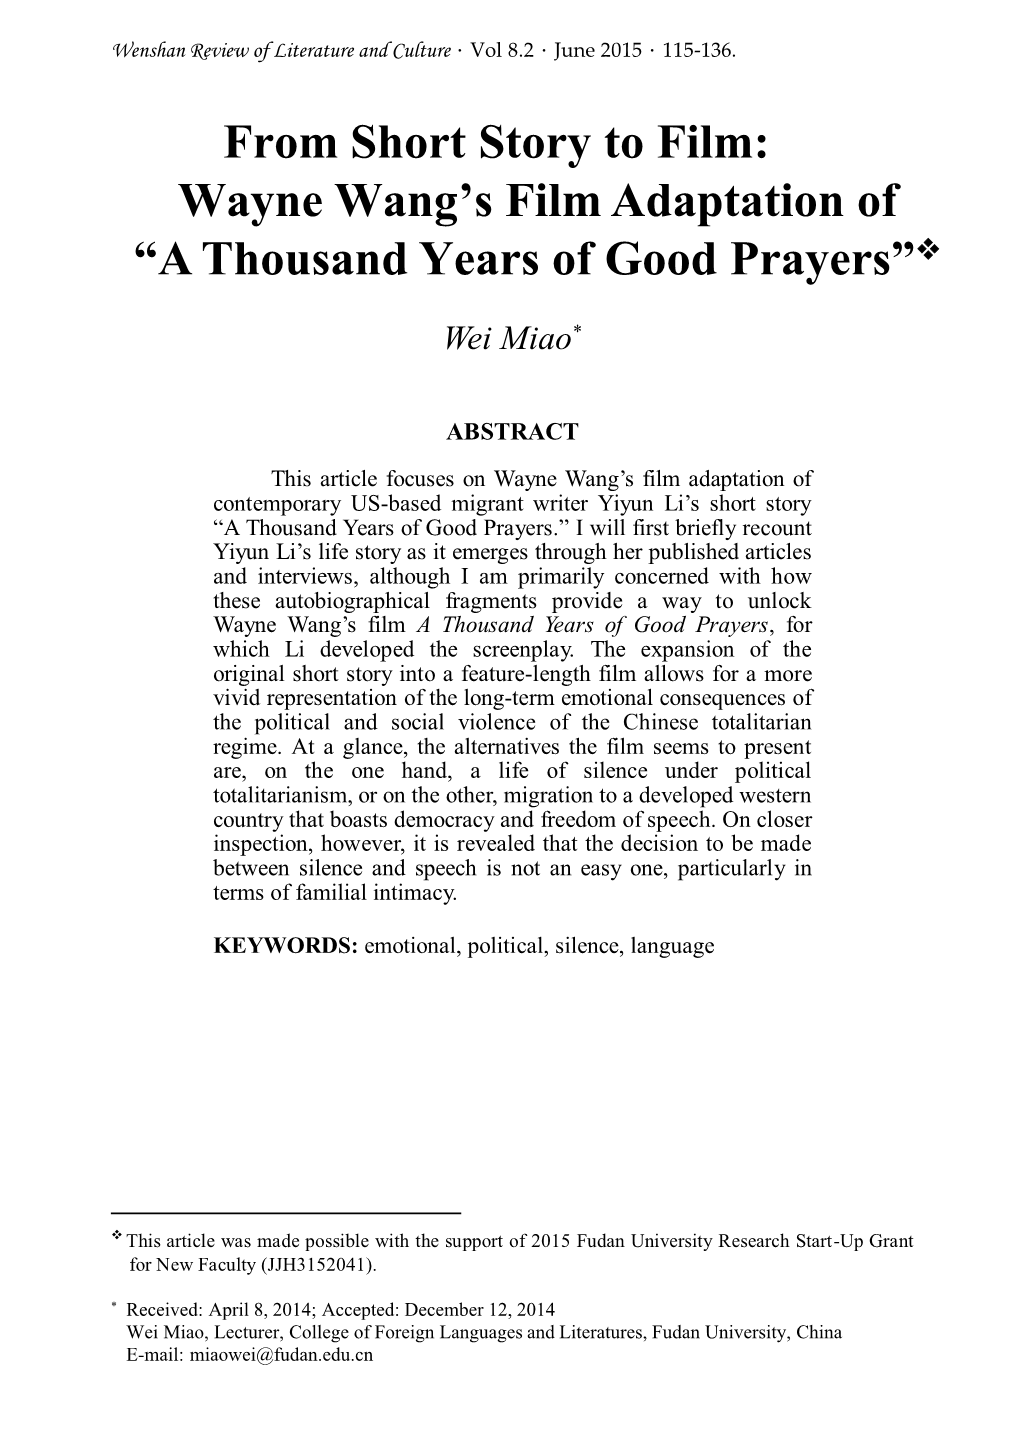 From Short Story to Film: Wayne Wang's Film Adaptation of “A Thousand Years of Good Prayers”